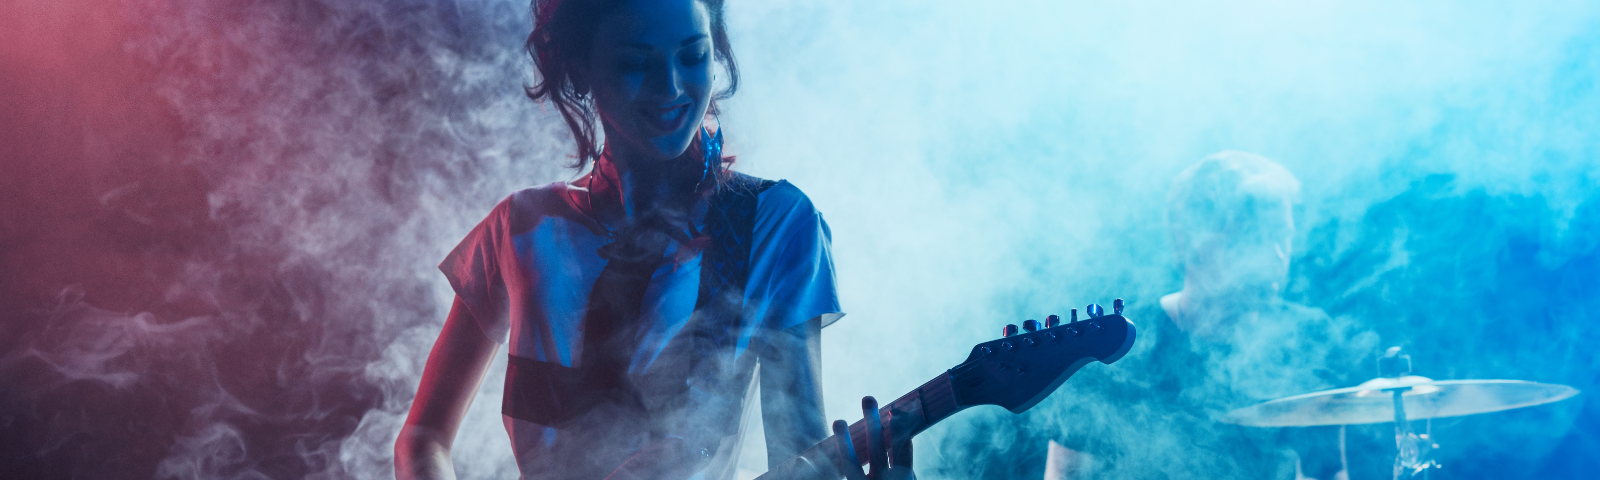 Girl playing a guitar on a smokey stage.